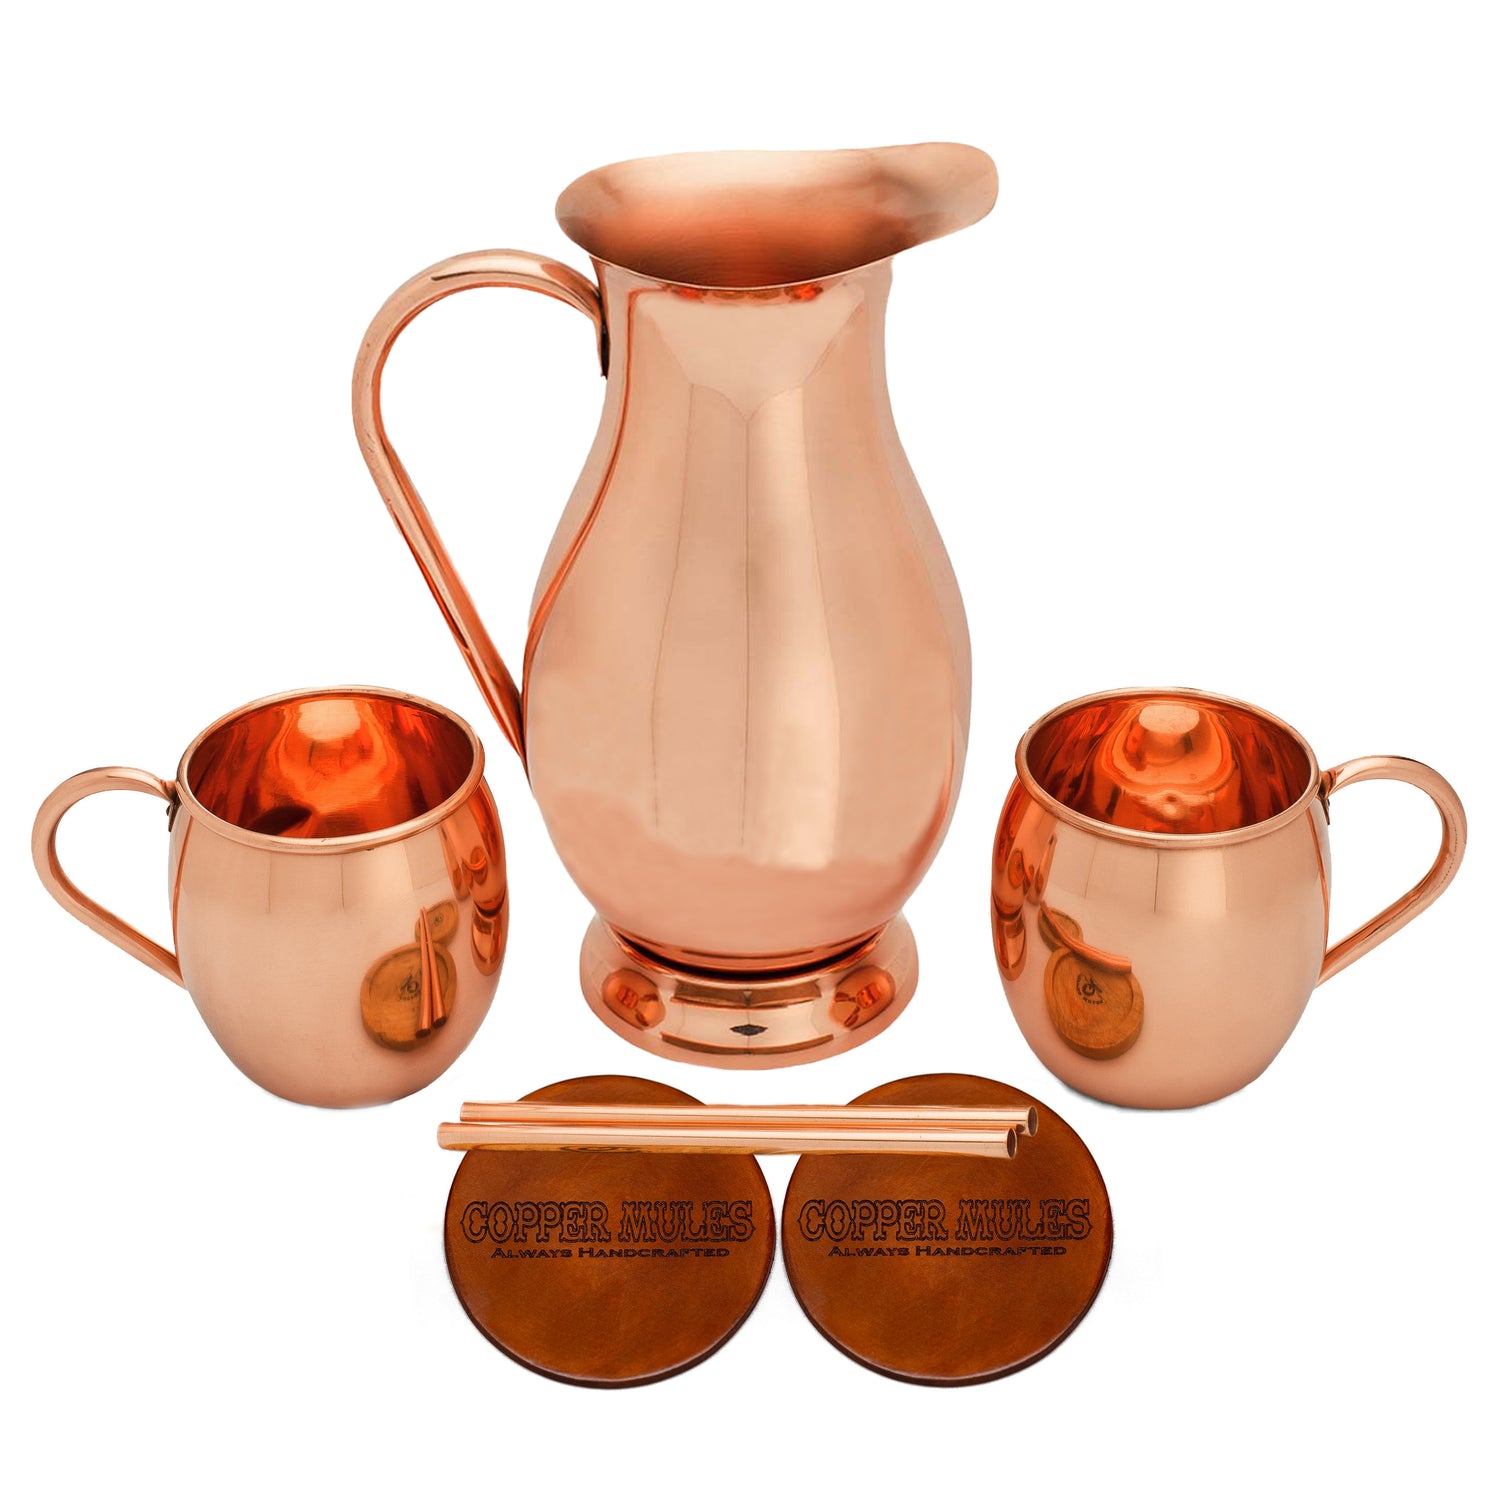 Elegant Copper Pitcher with PerfectFit Lid | 70 oz and 2 Barrel Smooth Mugs | Each Mug Holds 16 oz